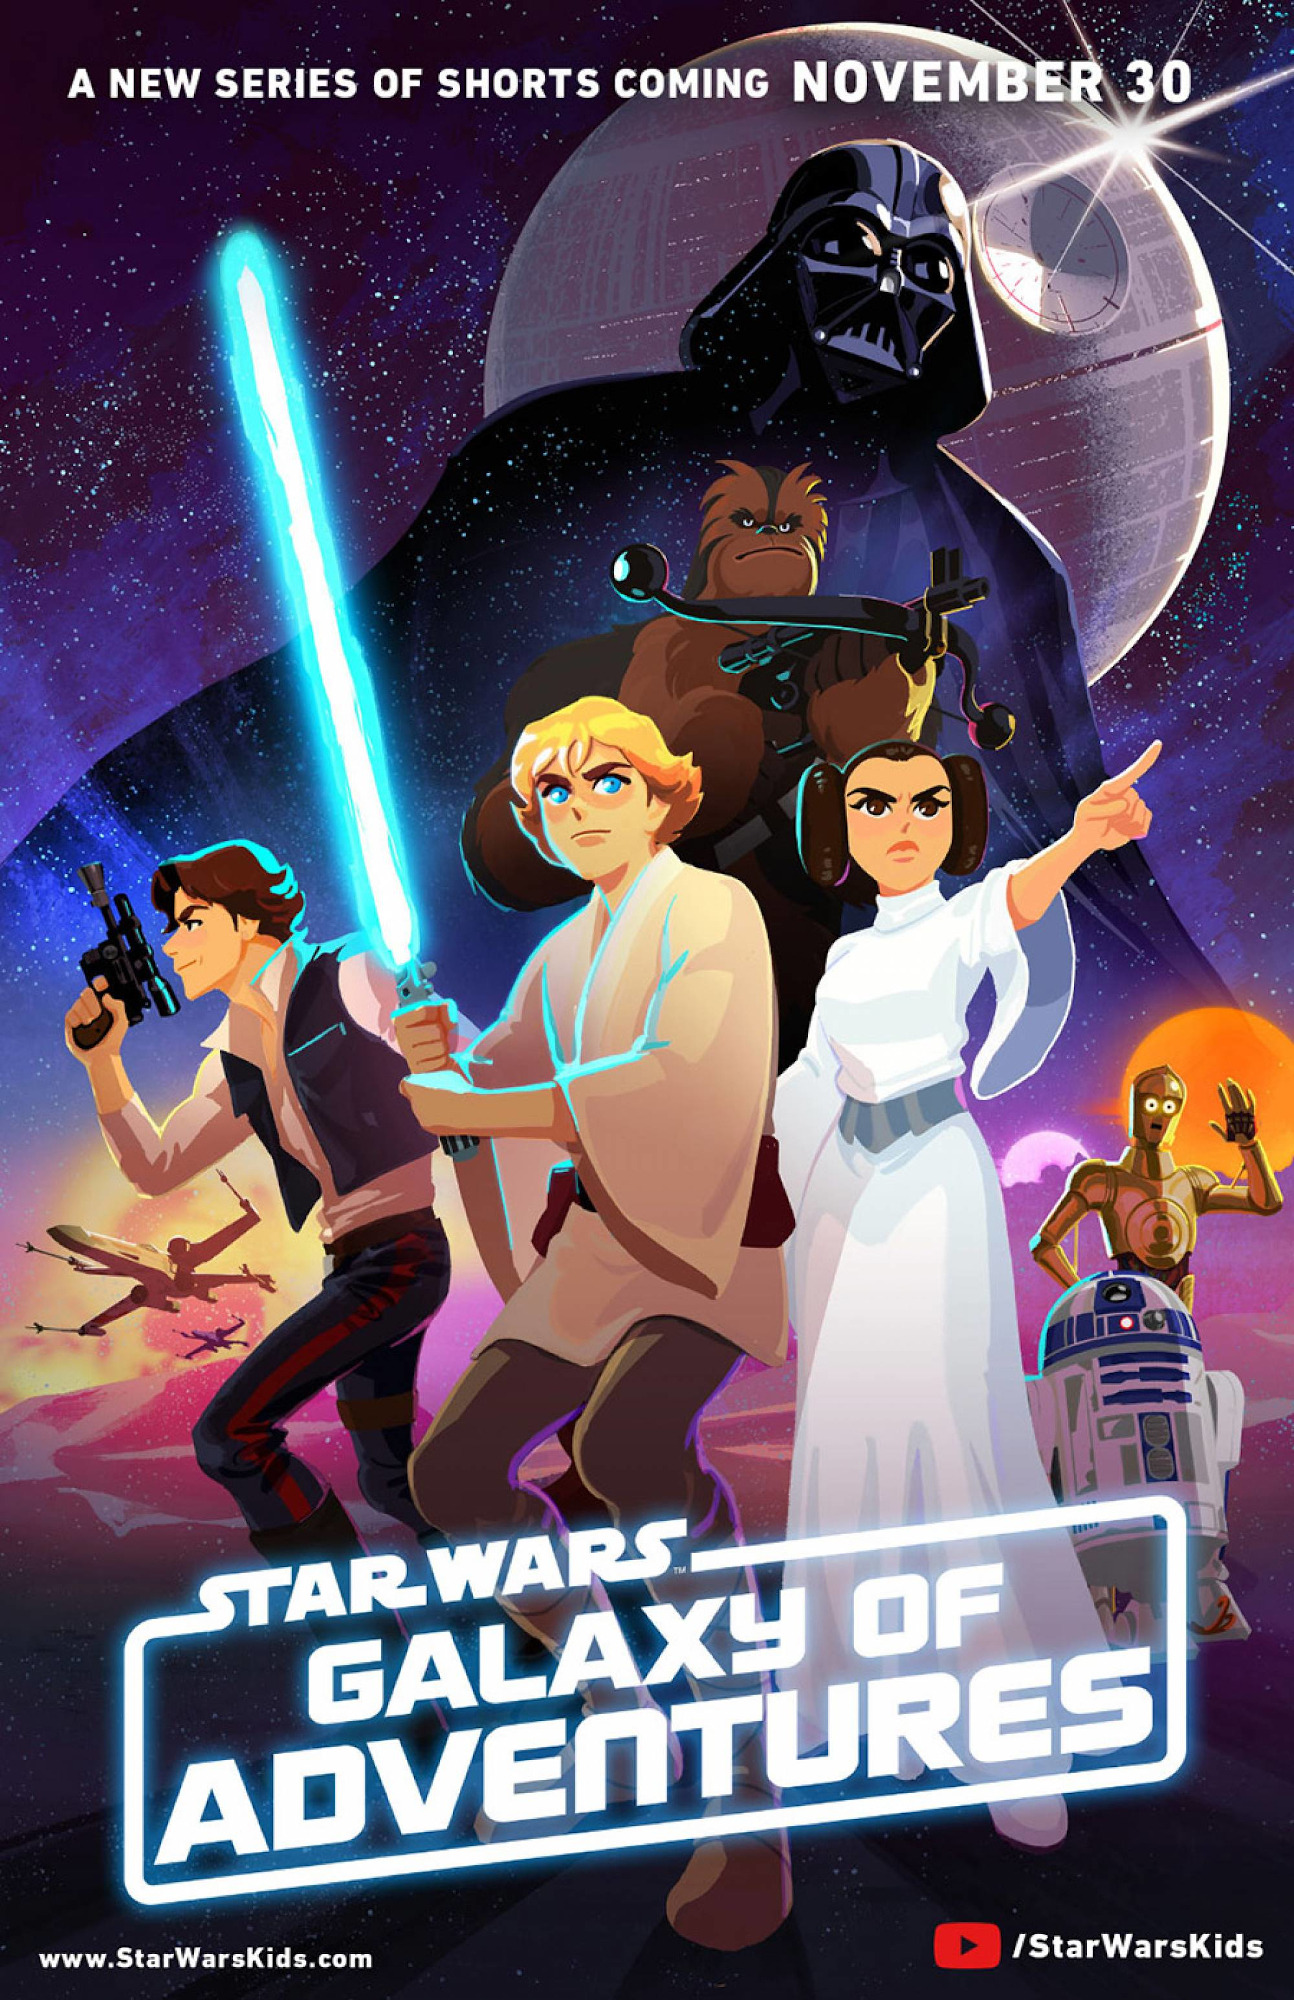 Mega Sized TV Poster Image for Star Wars Galaxy of Adventures 